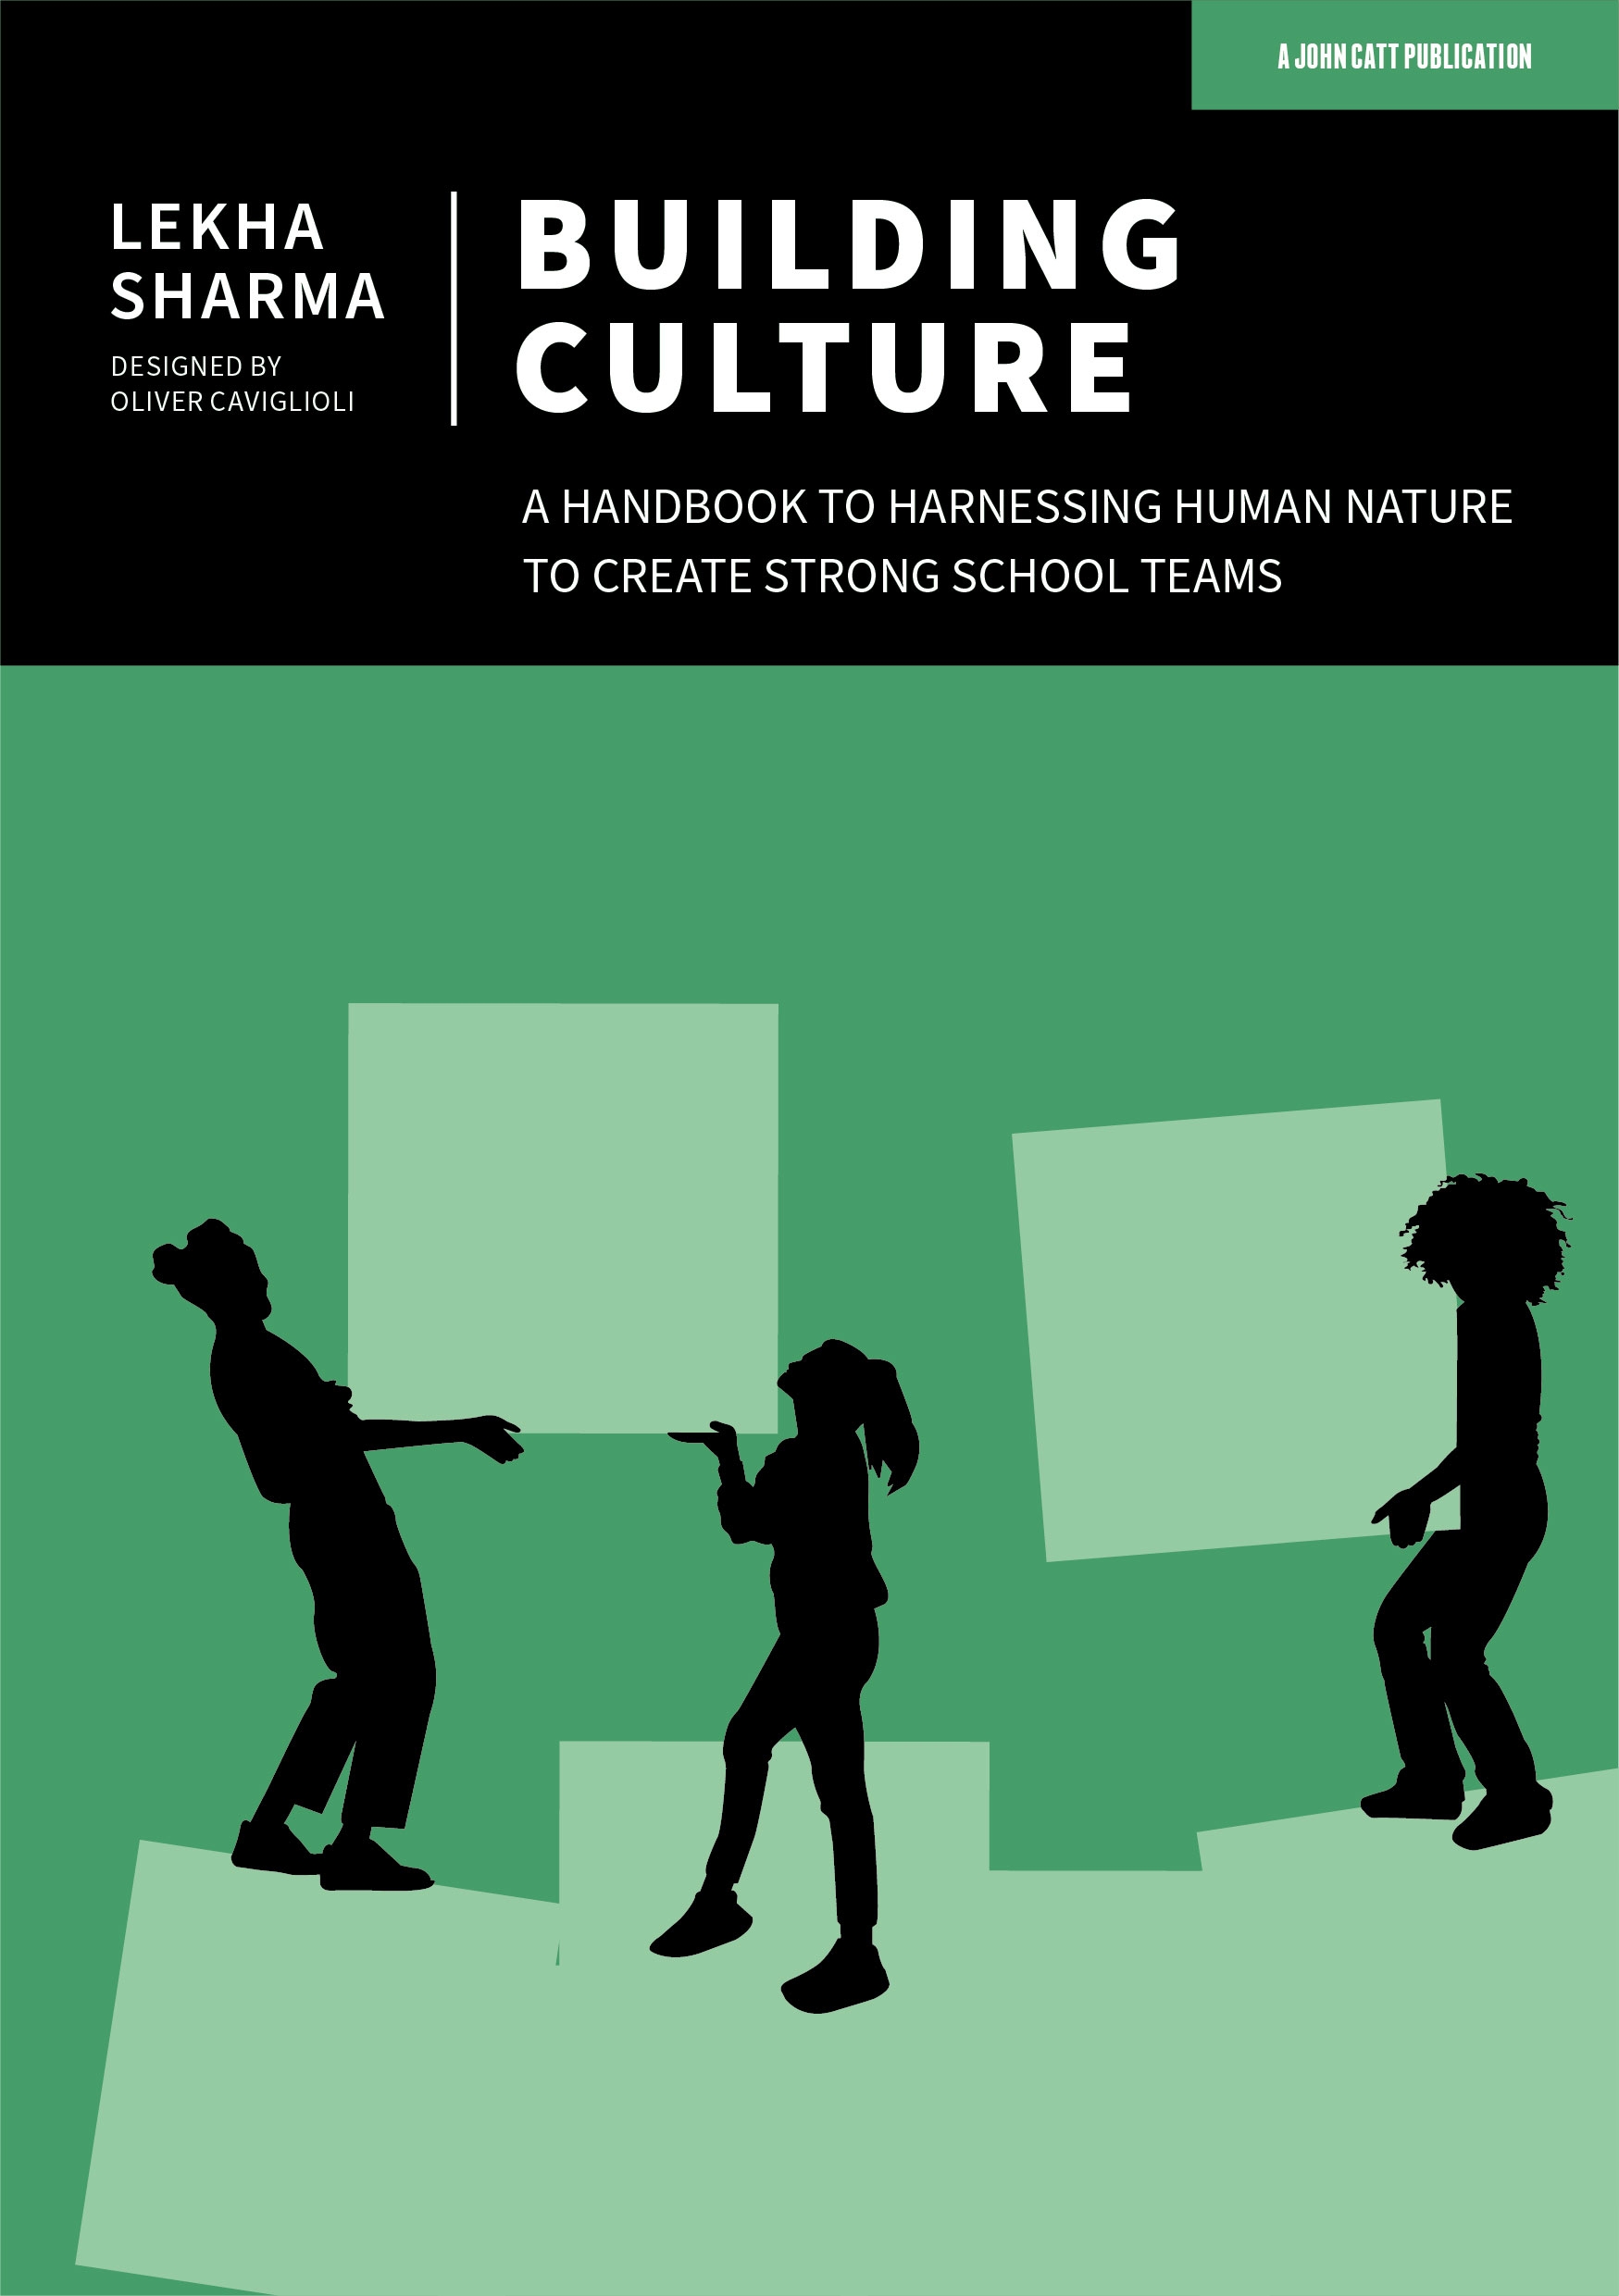 Featured image for “Building Culture: A handbook to harnessing human nature to create strong school teams”